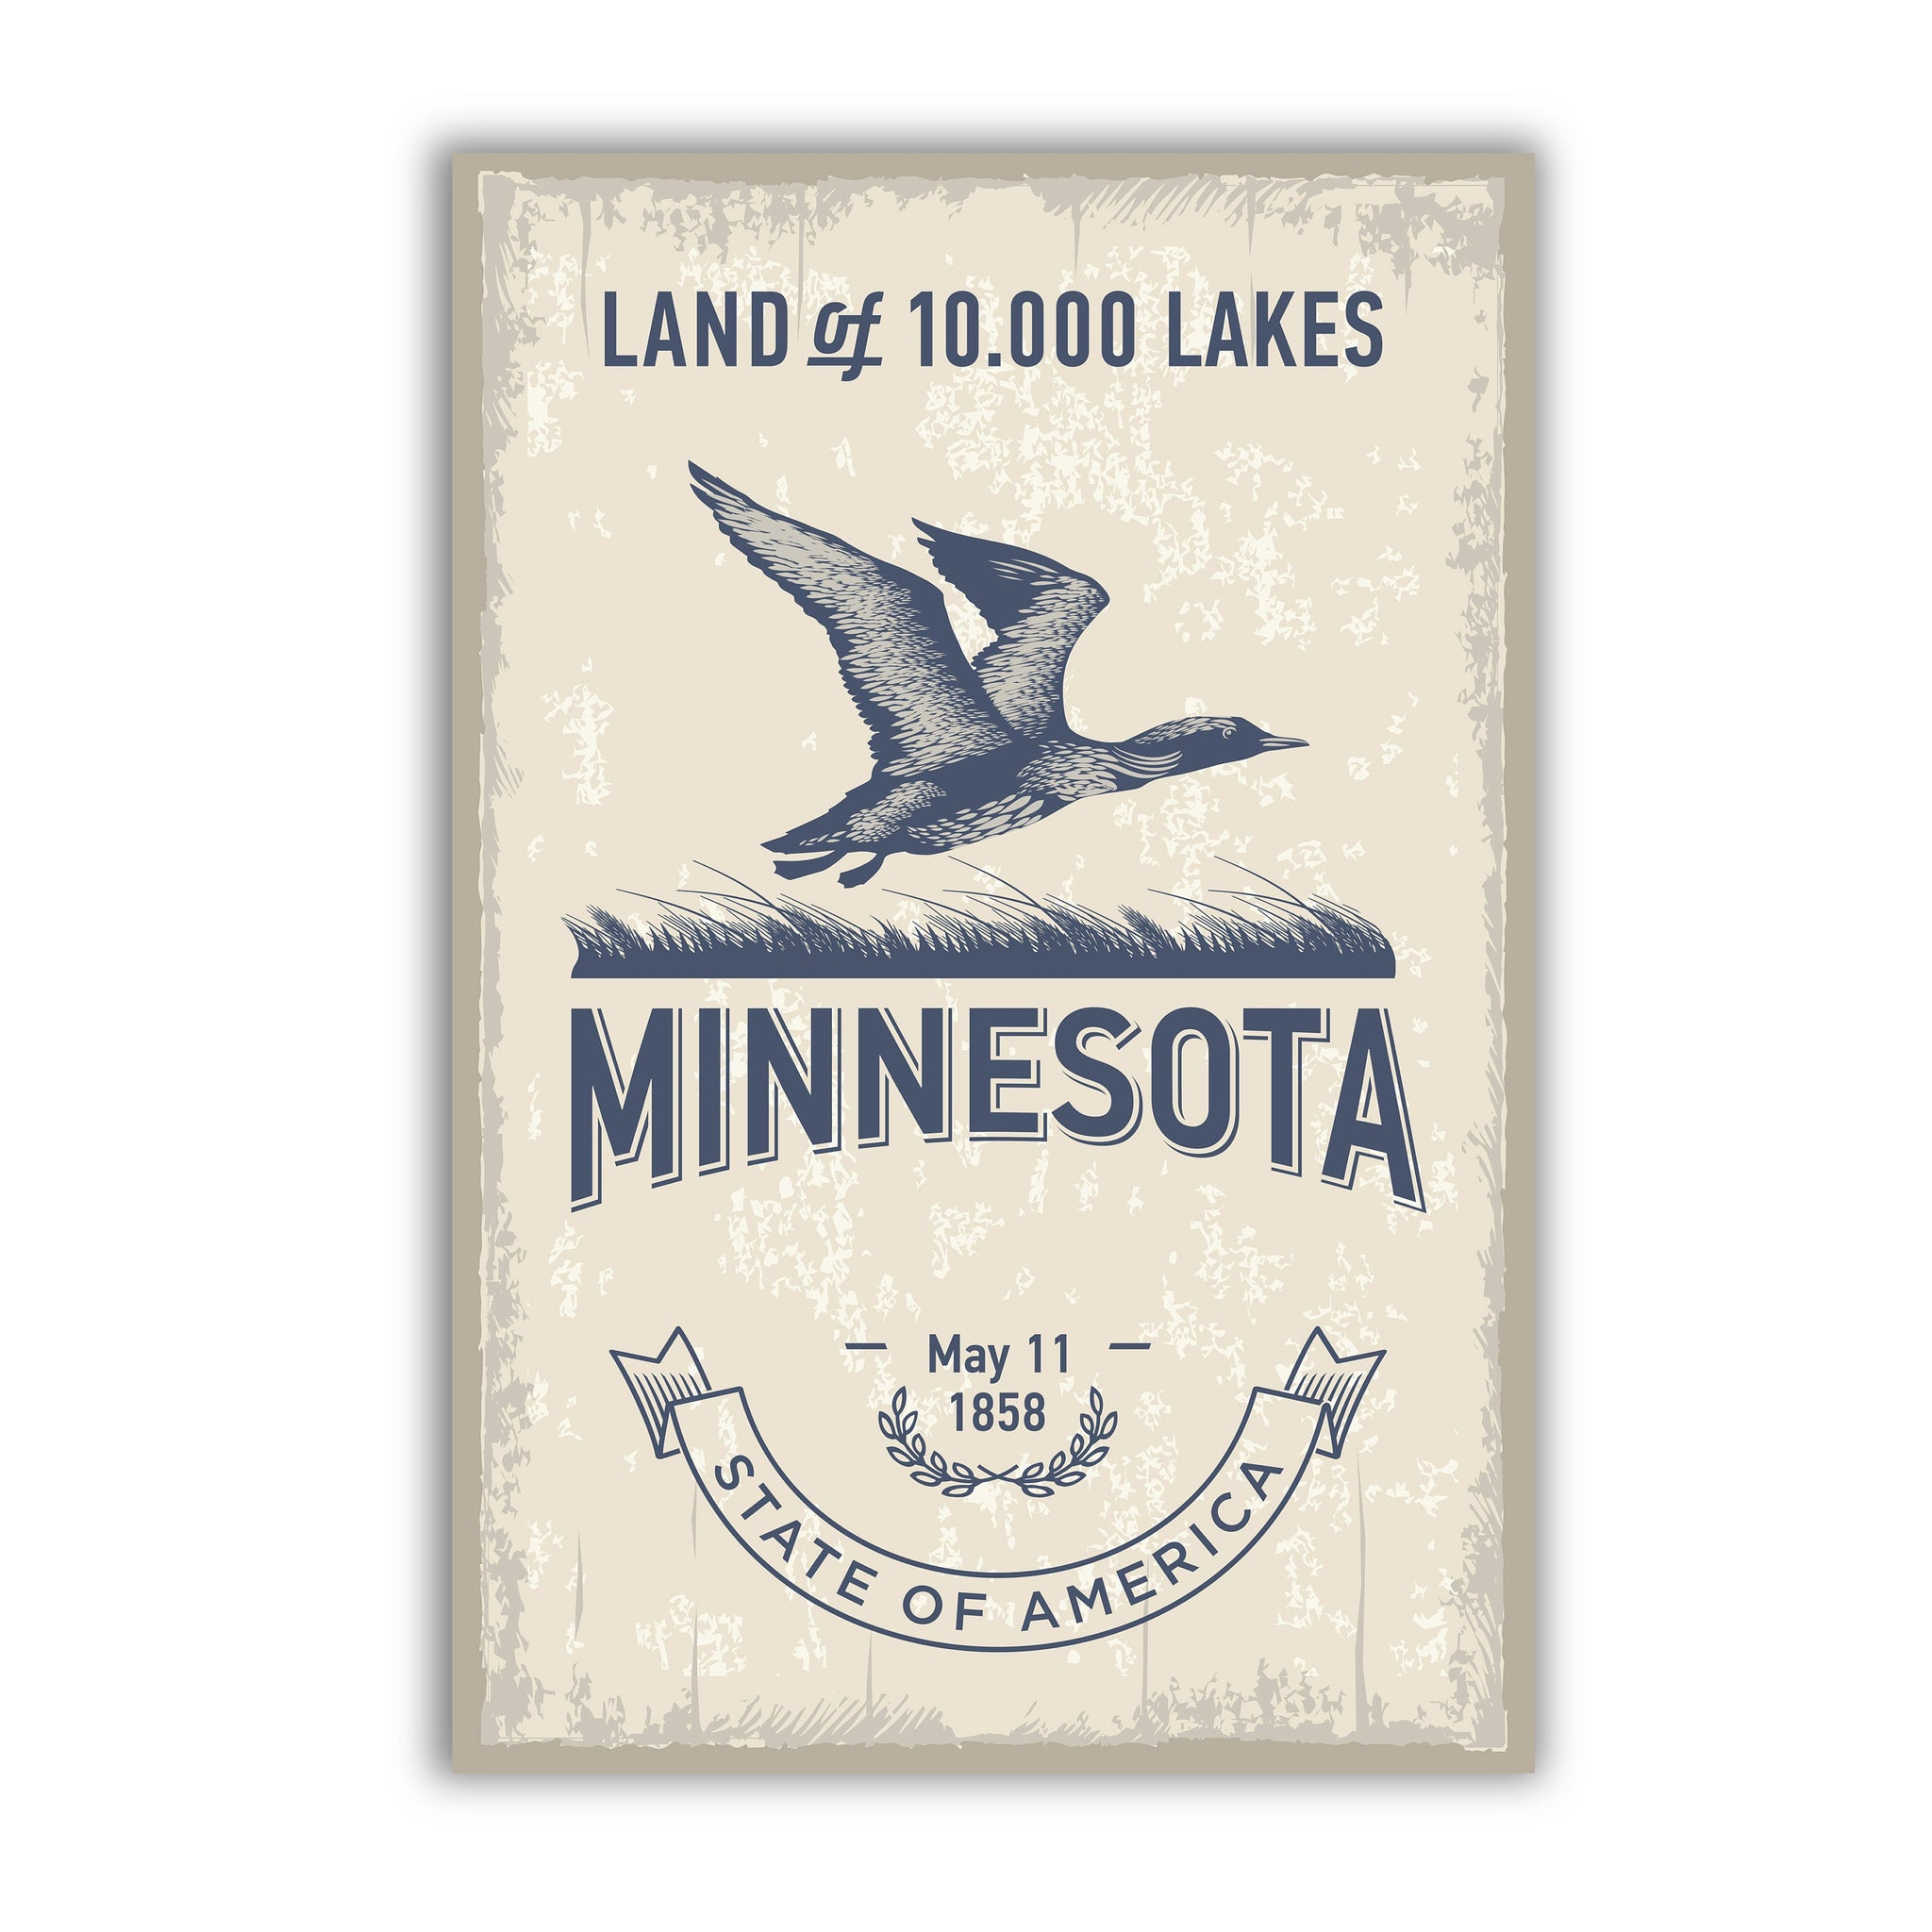 Minnesota State Symbol Poster, Minnesota State Poster Print, State Emblem Poster, Retro Travel State Poster, Home and Office Wall Art